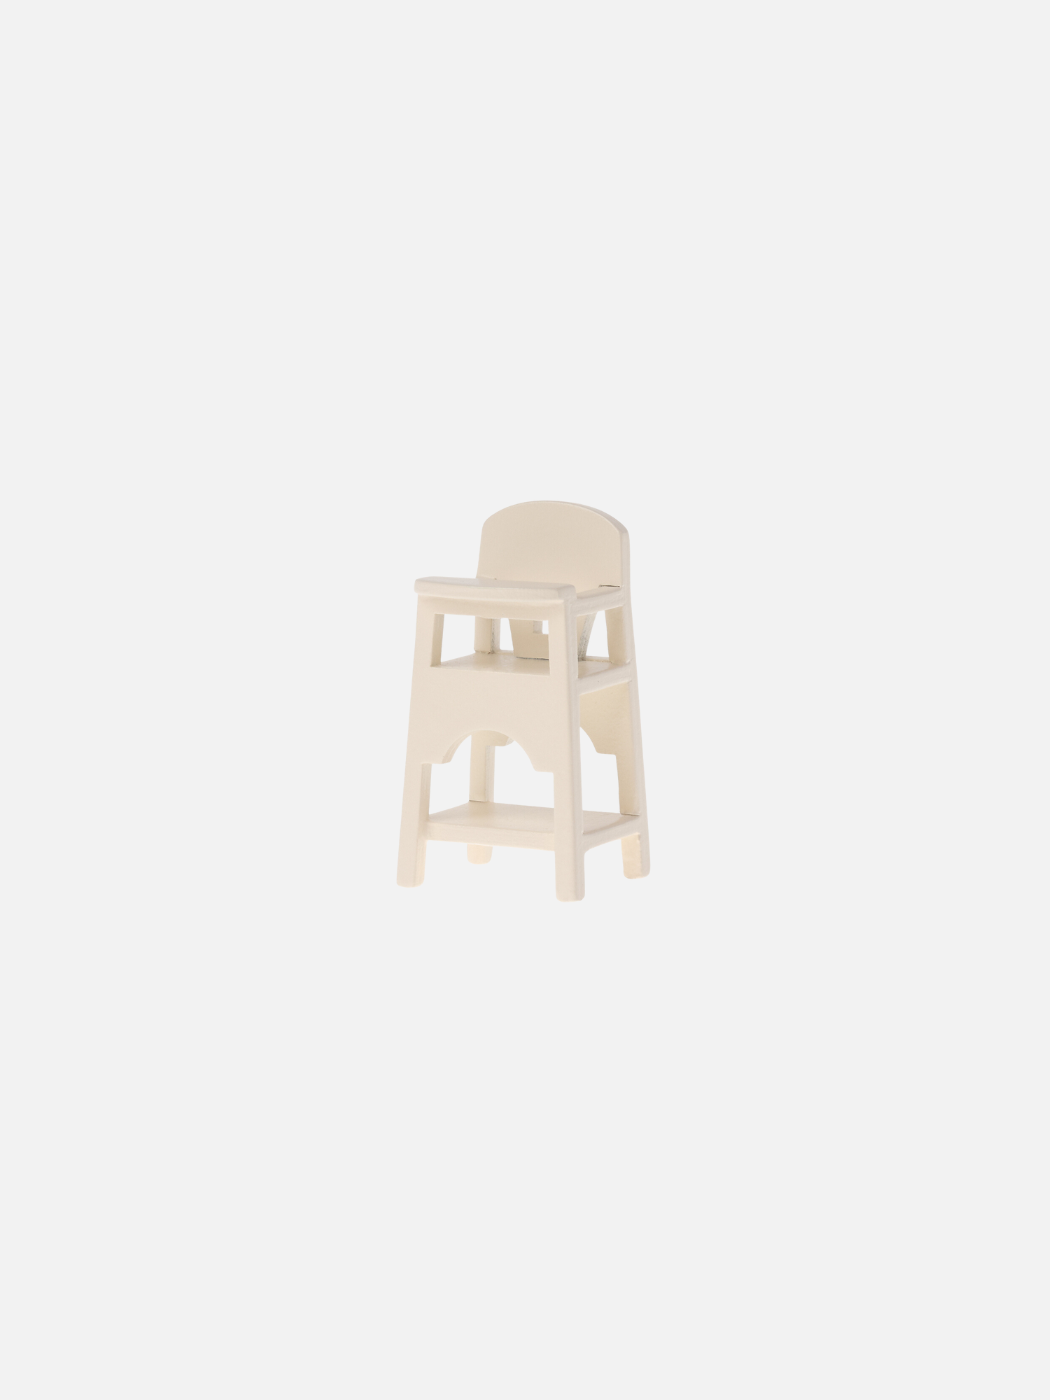 A tiny wooden highchair by Maileg